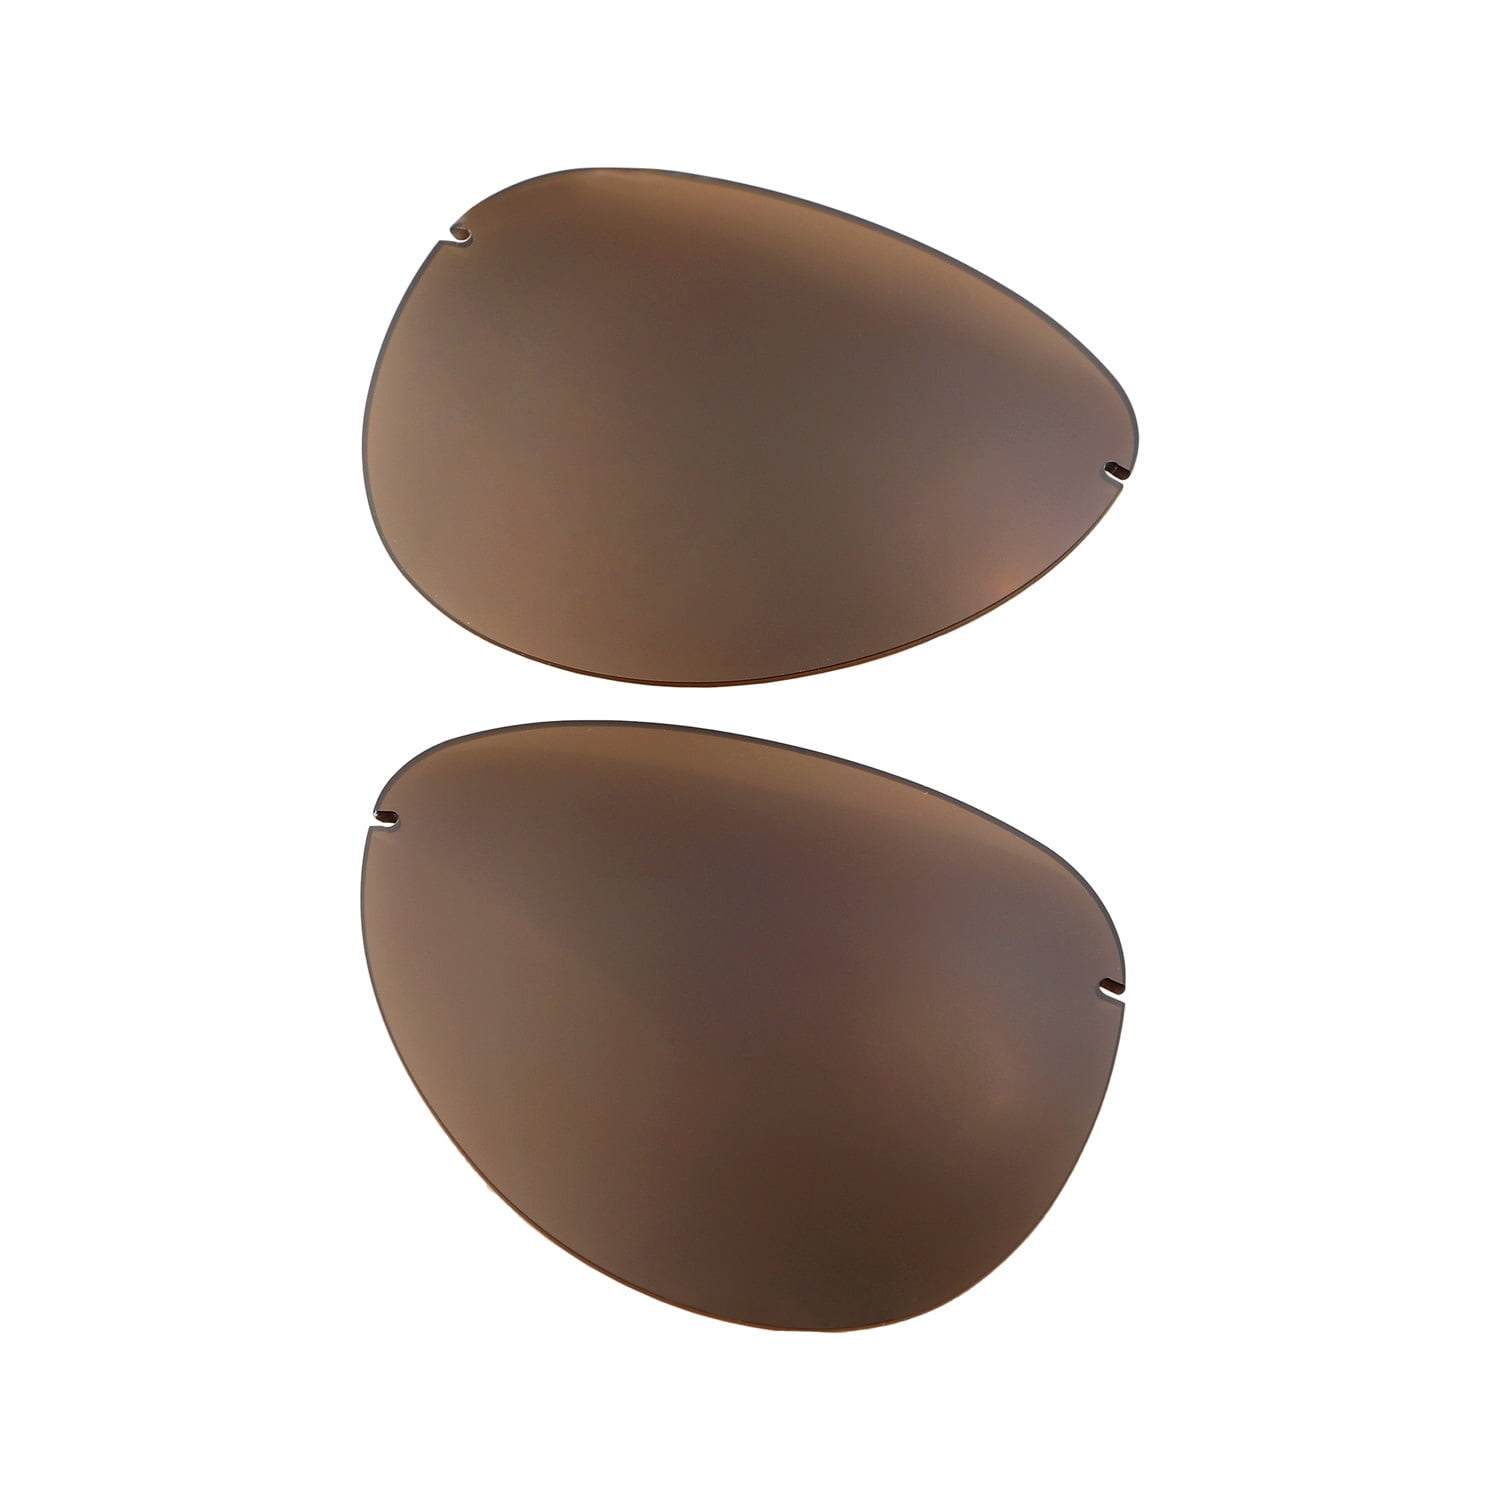 Max.Shield Polarized Replacement Lenses for-Oakley Tailend OO4088